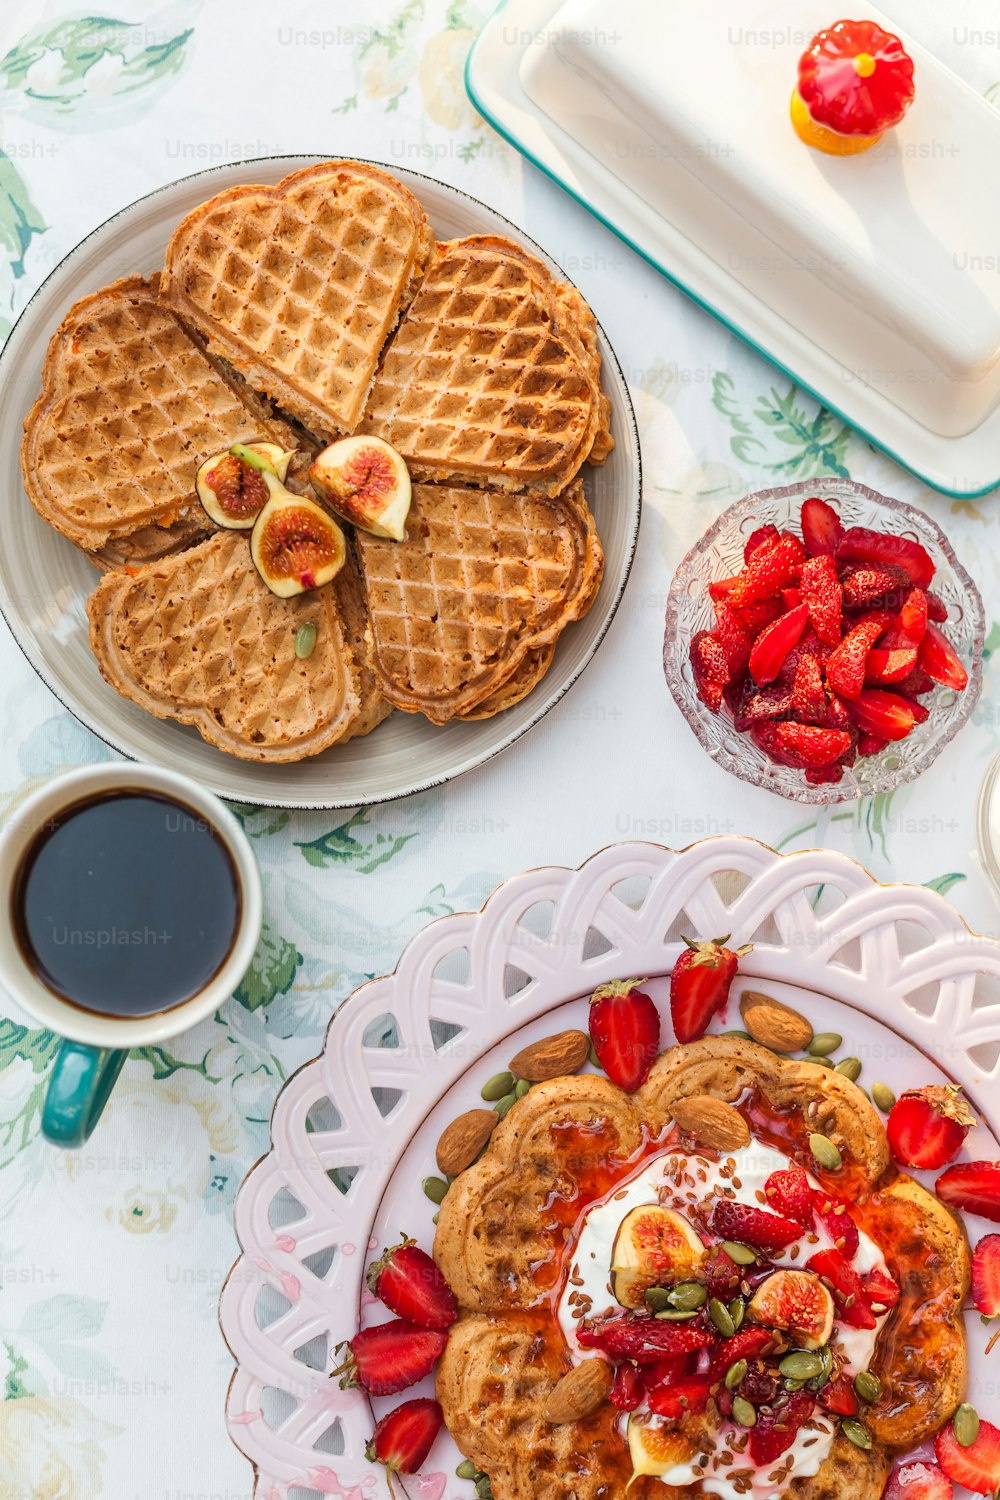 a table topped with waffles and fruit next to a cup of coffee